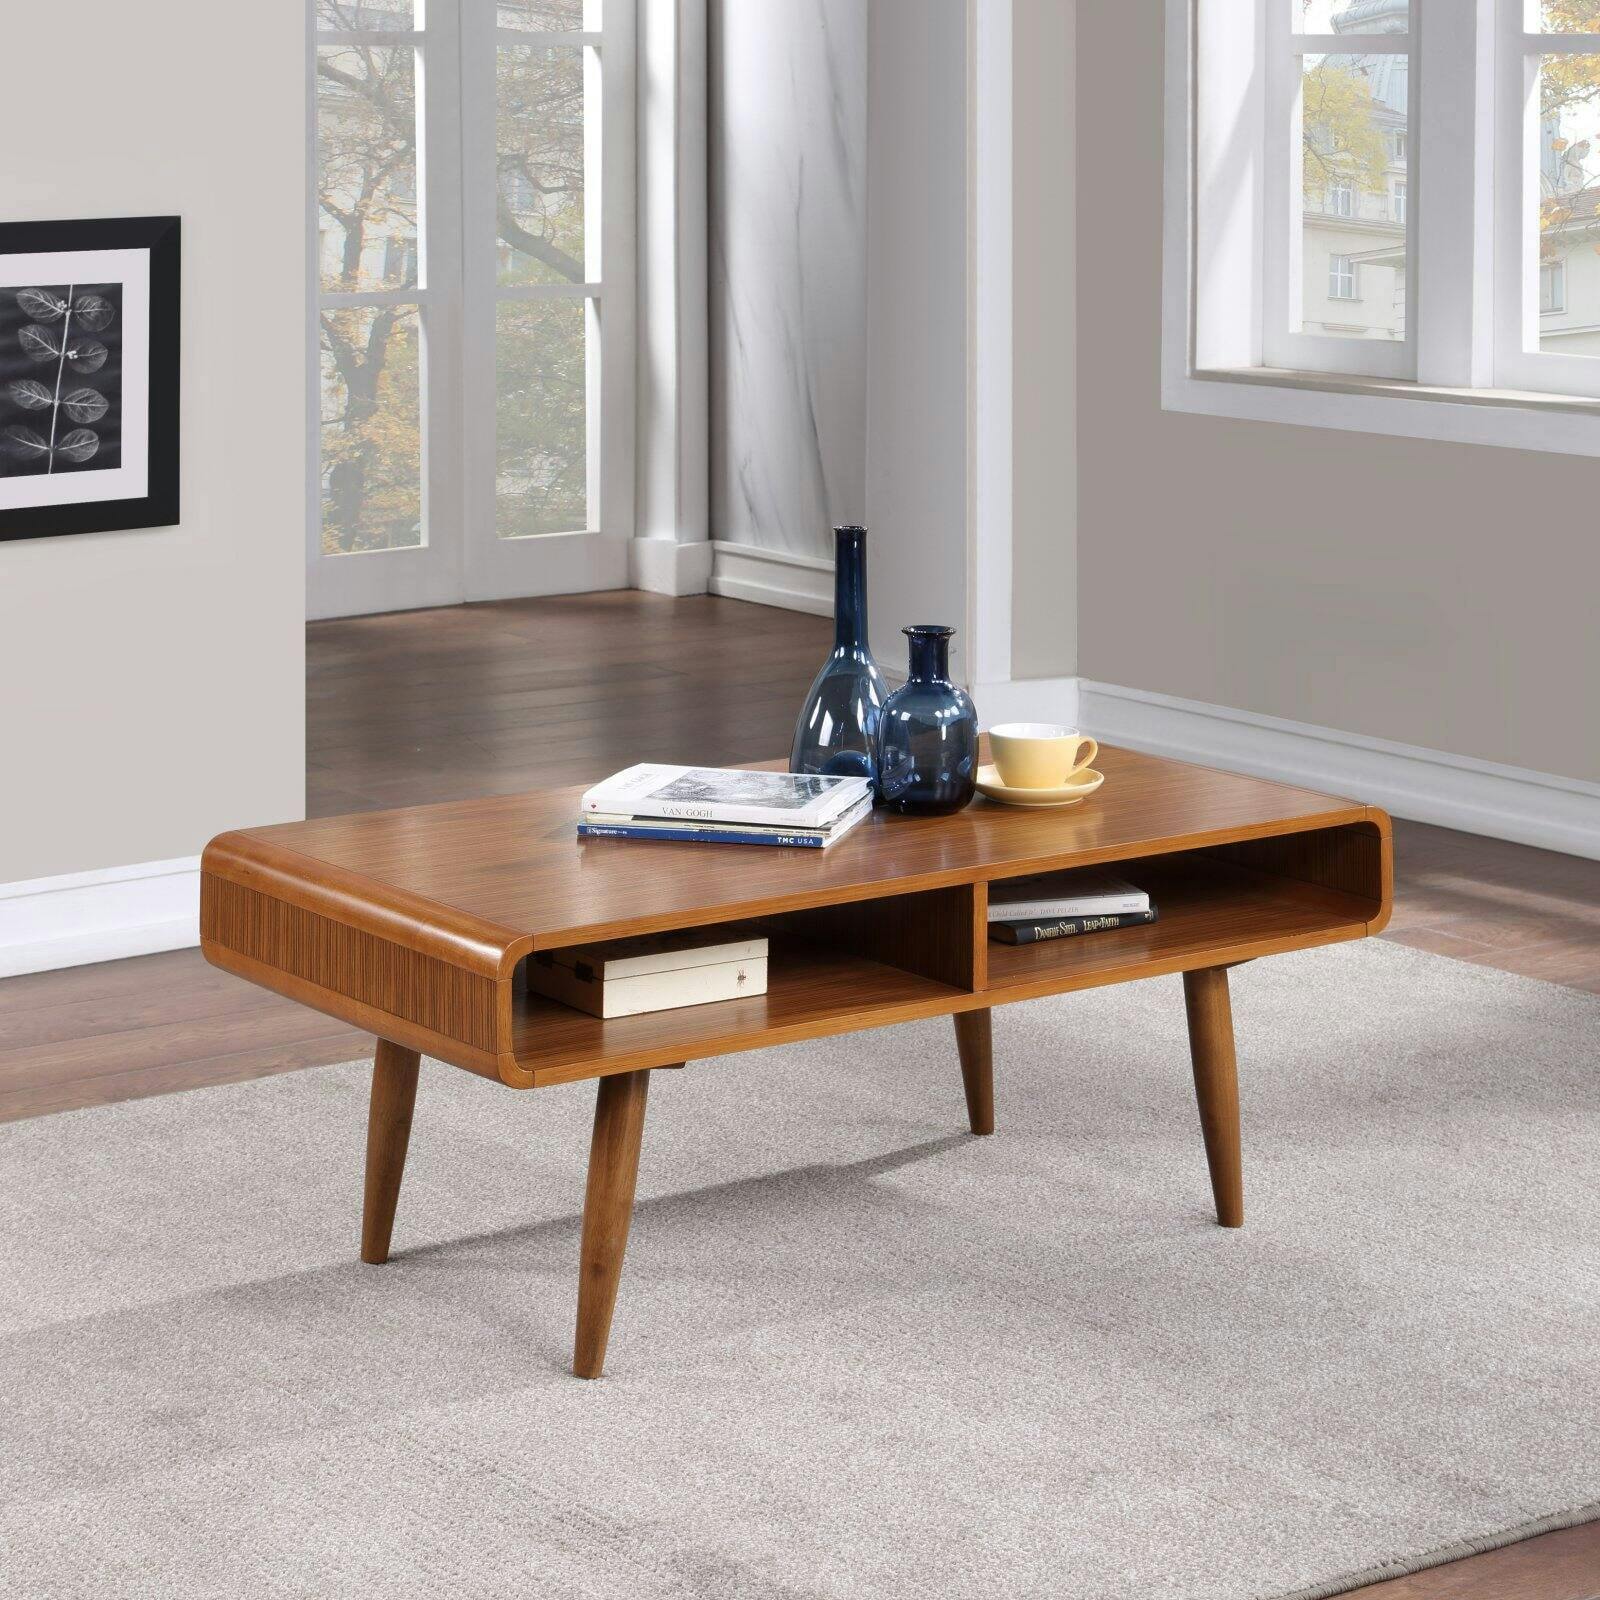 Zambrano Wood Round Chic Coffee Table with Open Storage